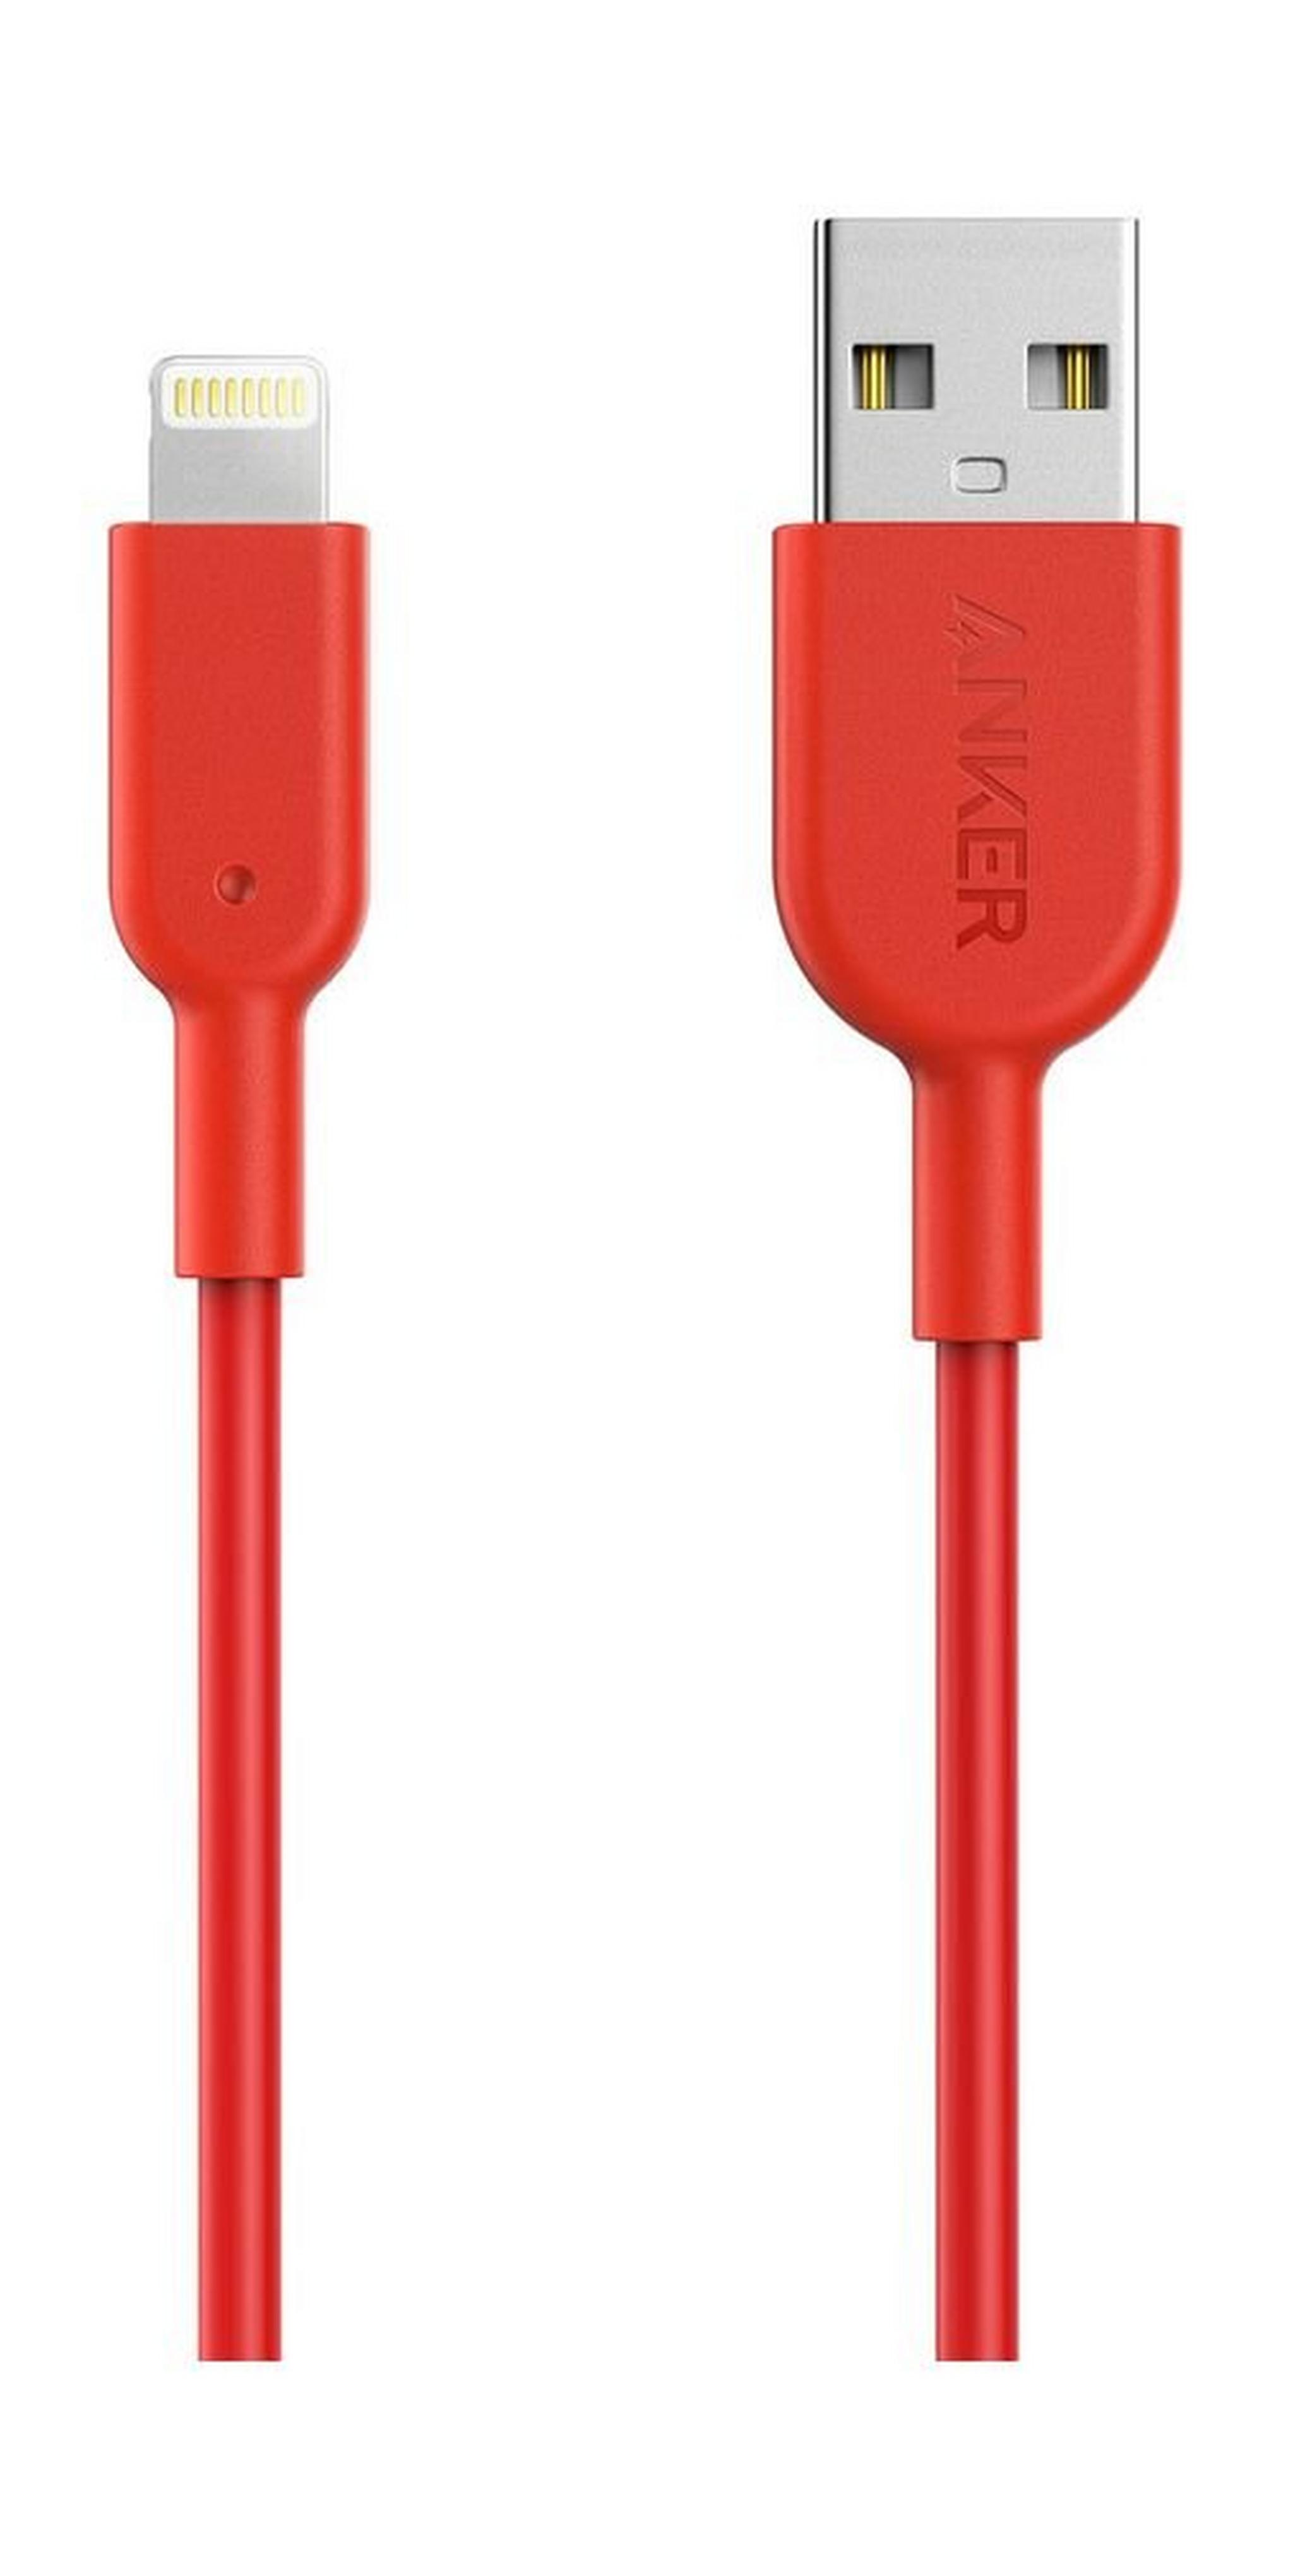 Anker PowerLine II Lightning Cable 1.8m - Red